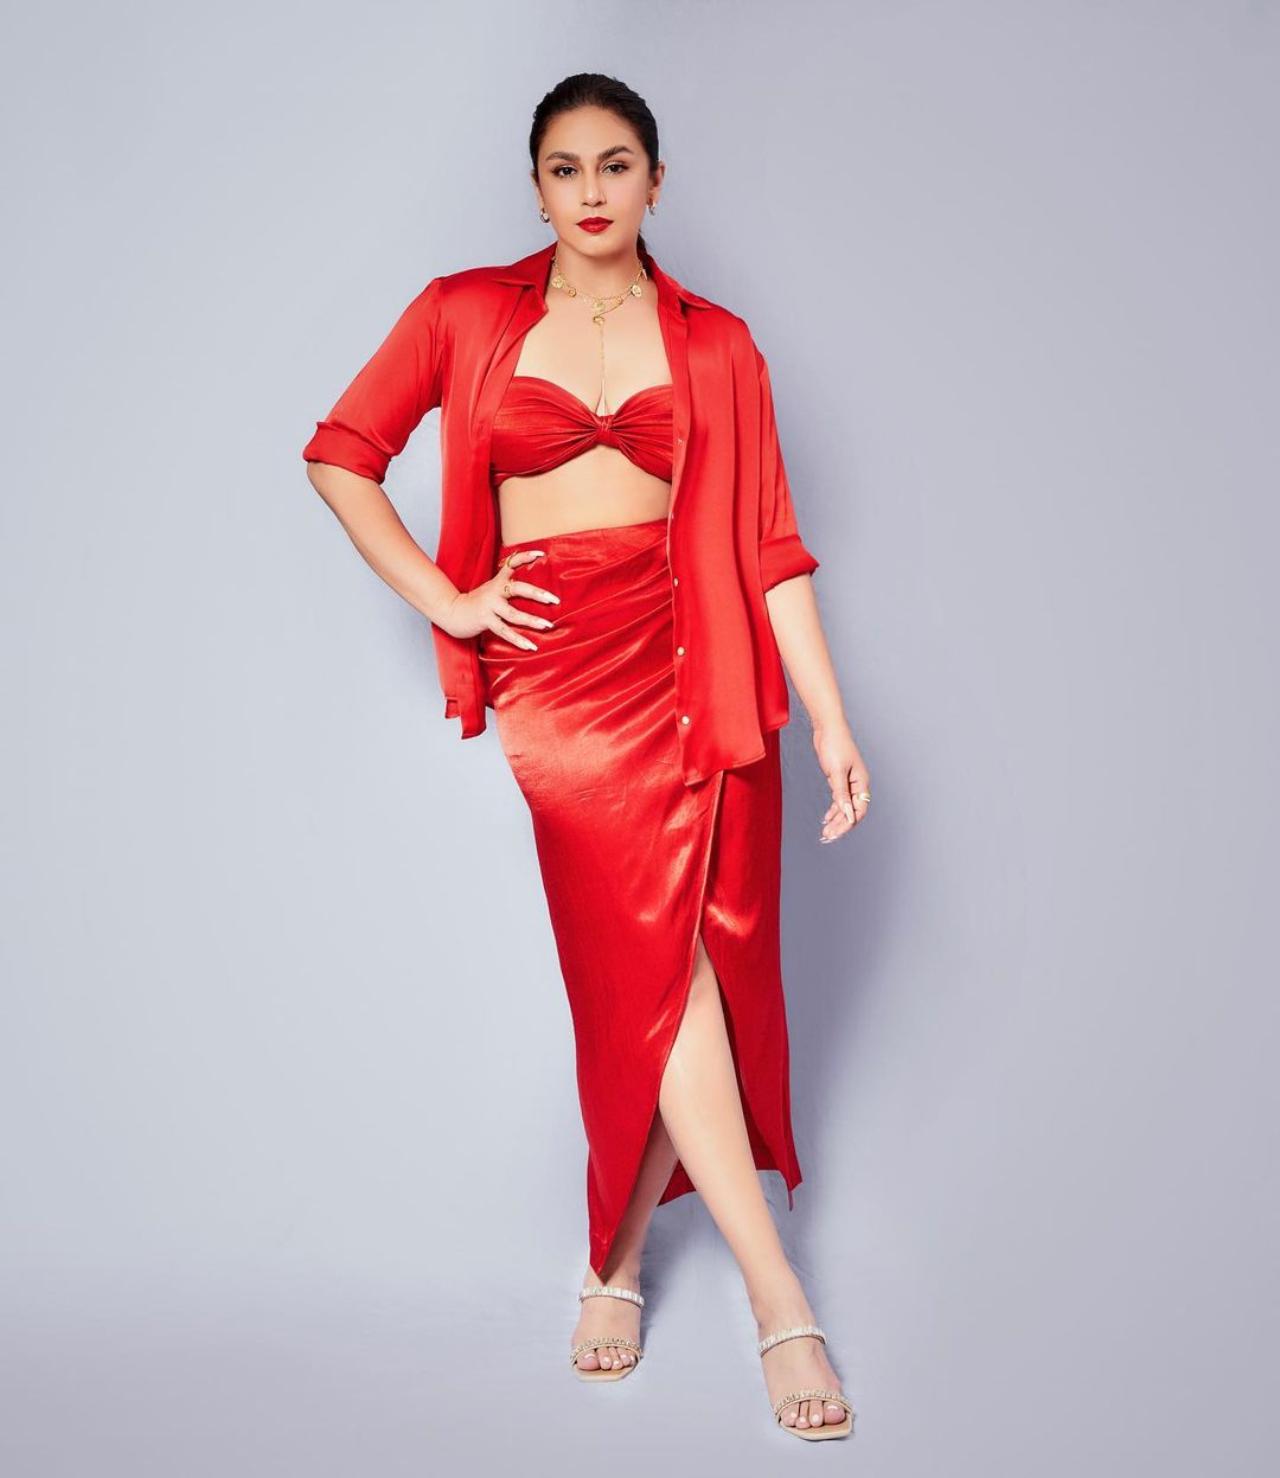 Huma looked drop-dead gorgeous in a fiery red outfit for the Netflix event promoting her upcoming film 'Monica, O My Darling'. She was accompanied by her co-star Rajkummar Rao